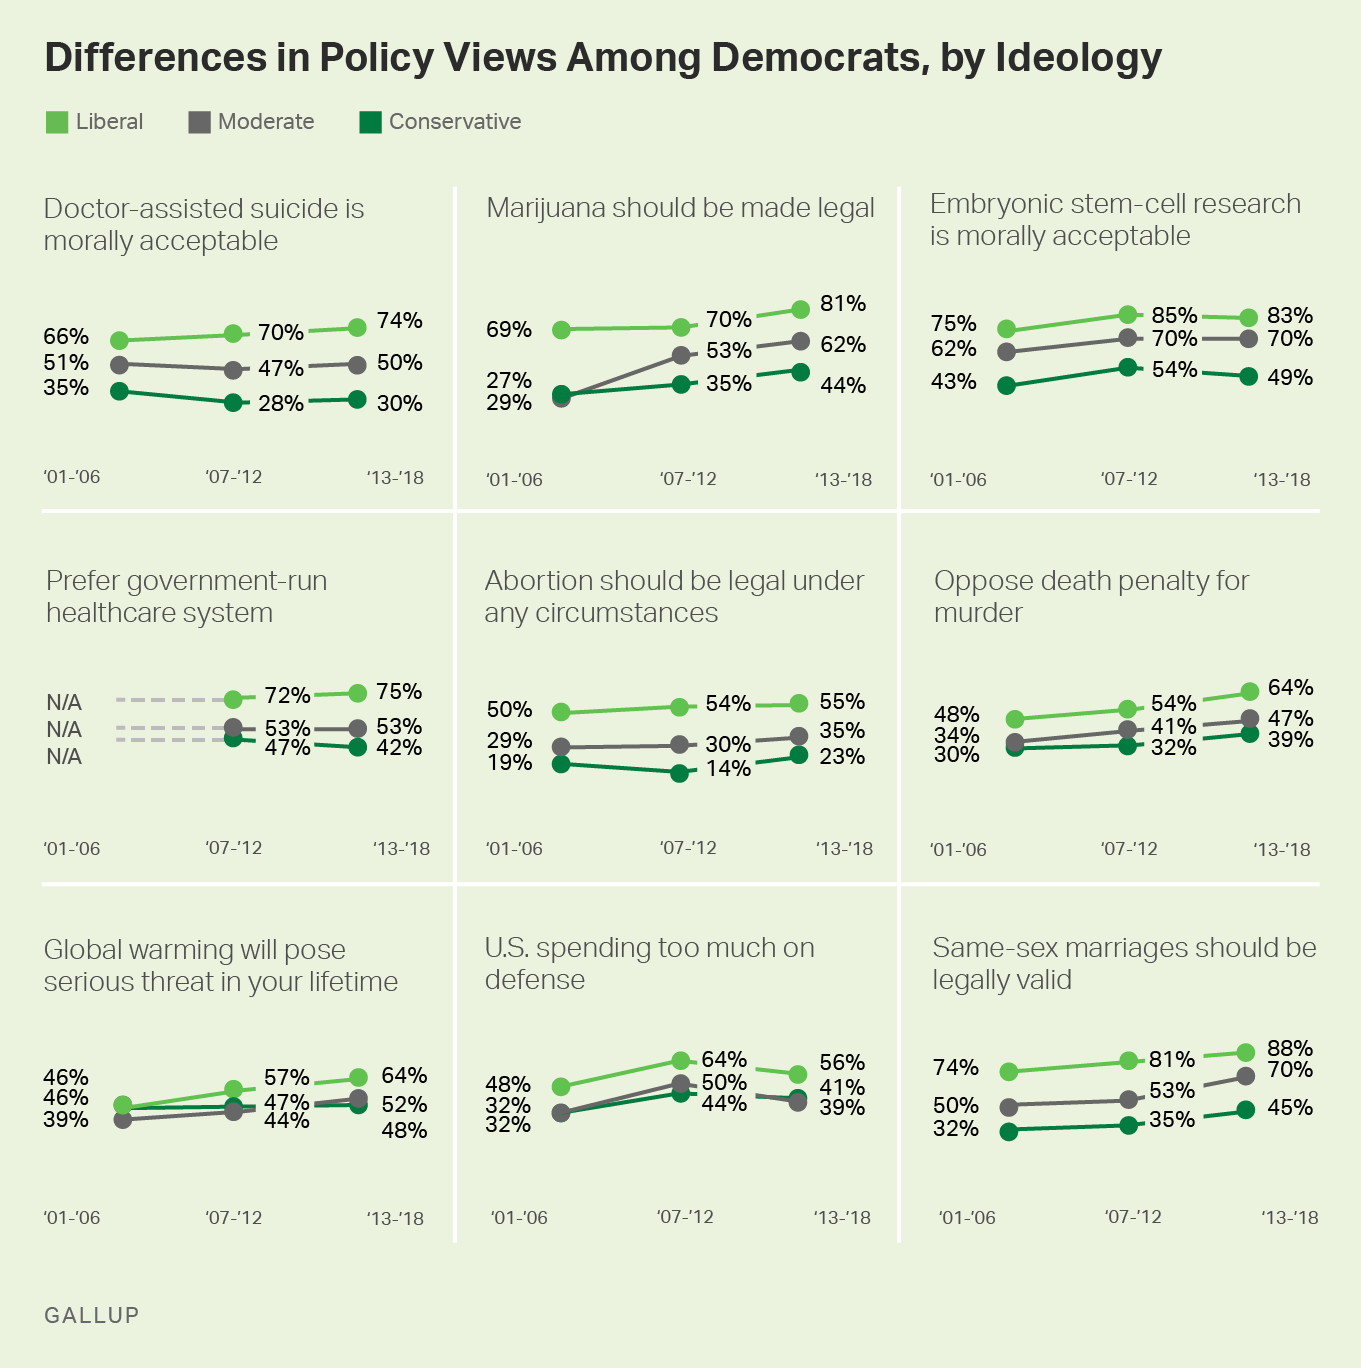 Small multiple graphs. Differences in policy views among Democrats, by ideology, 2001-2018 trends.